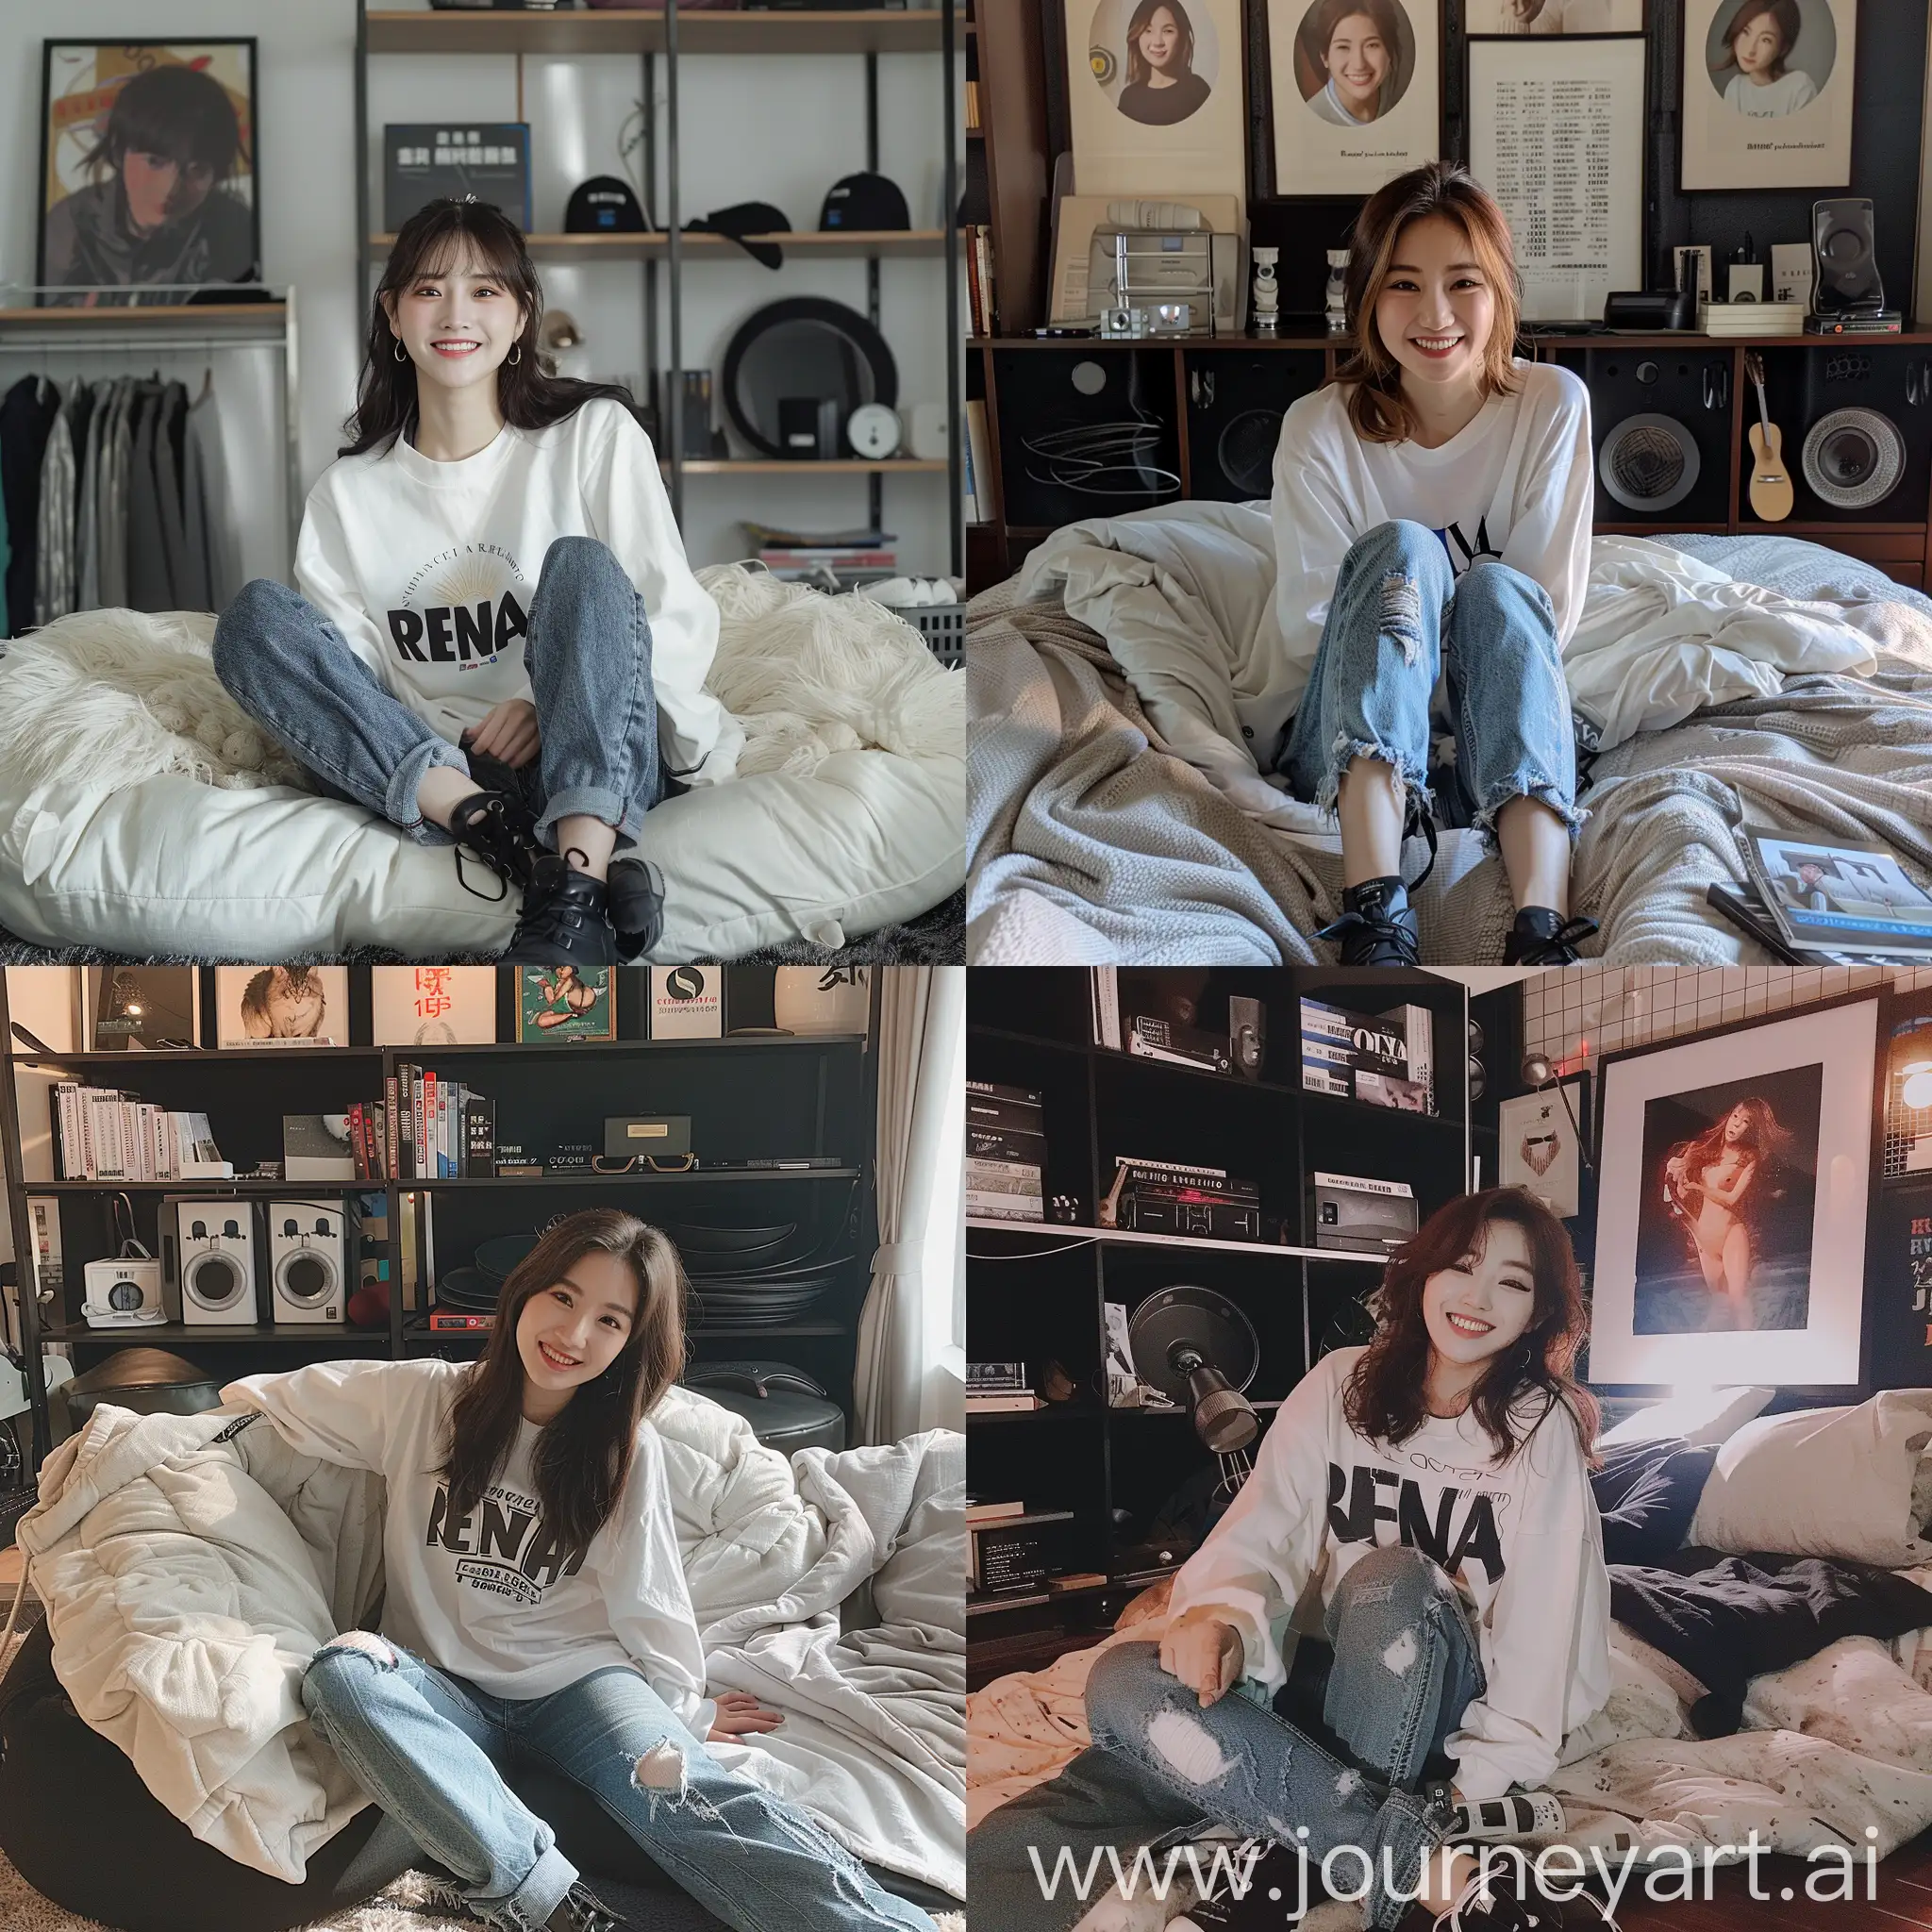 Funny-Taiwanese-Pop-Idol-in-Casual-Attire-Relaxing-in-Bedroom